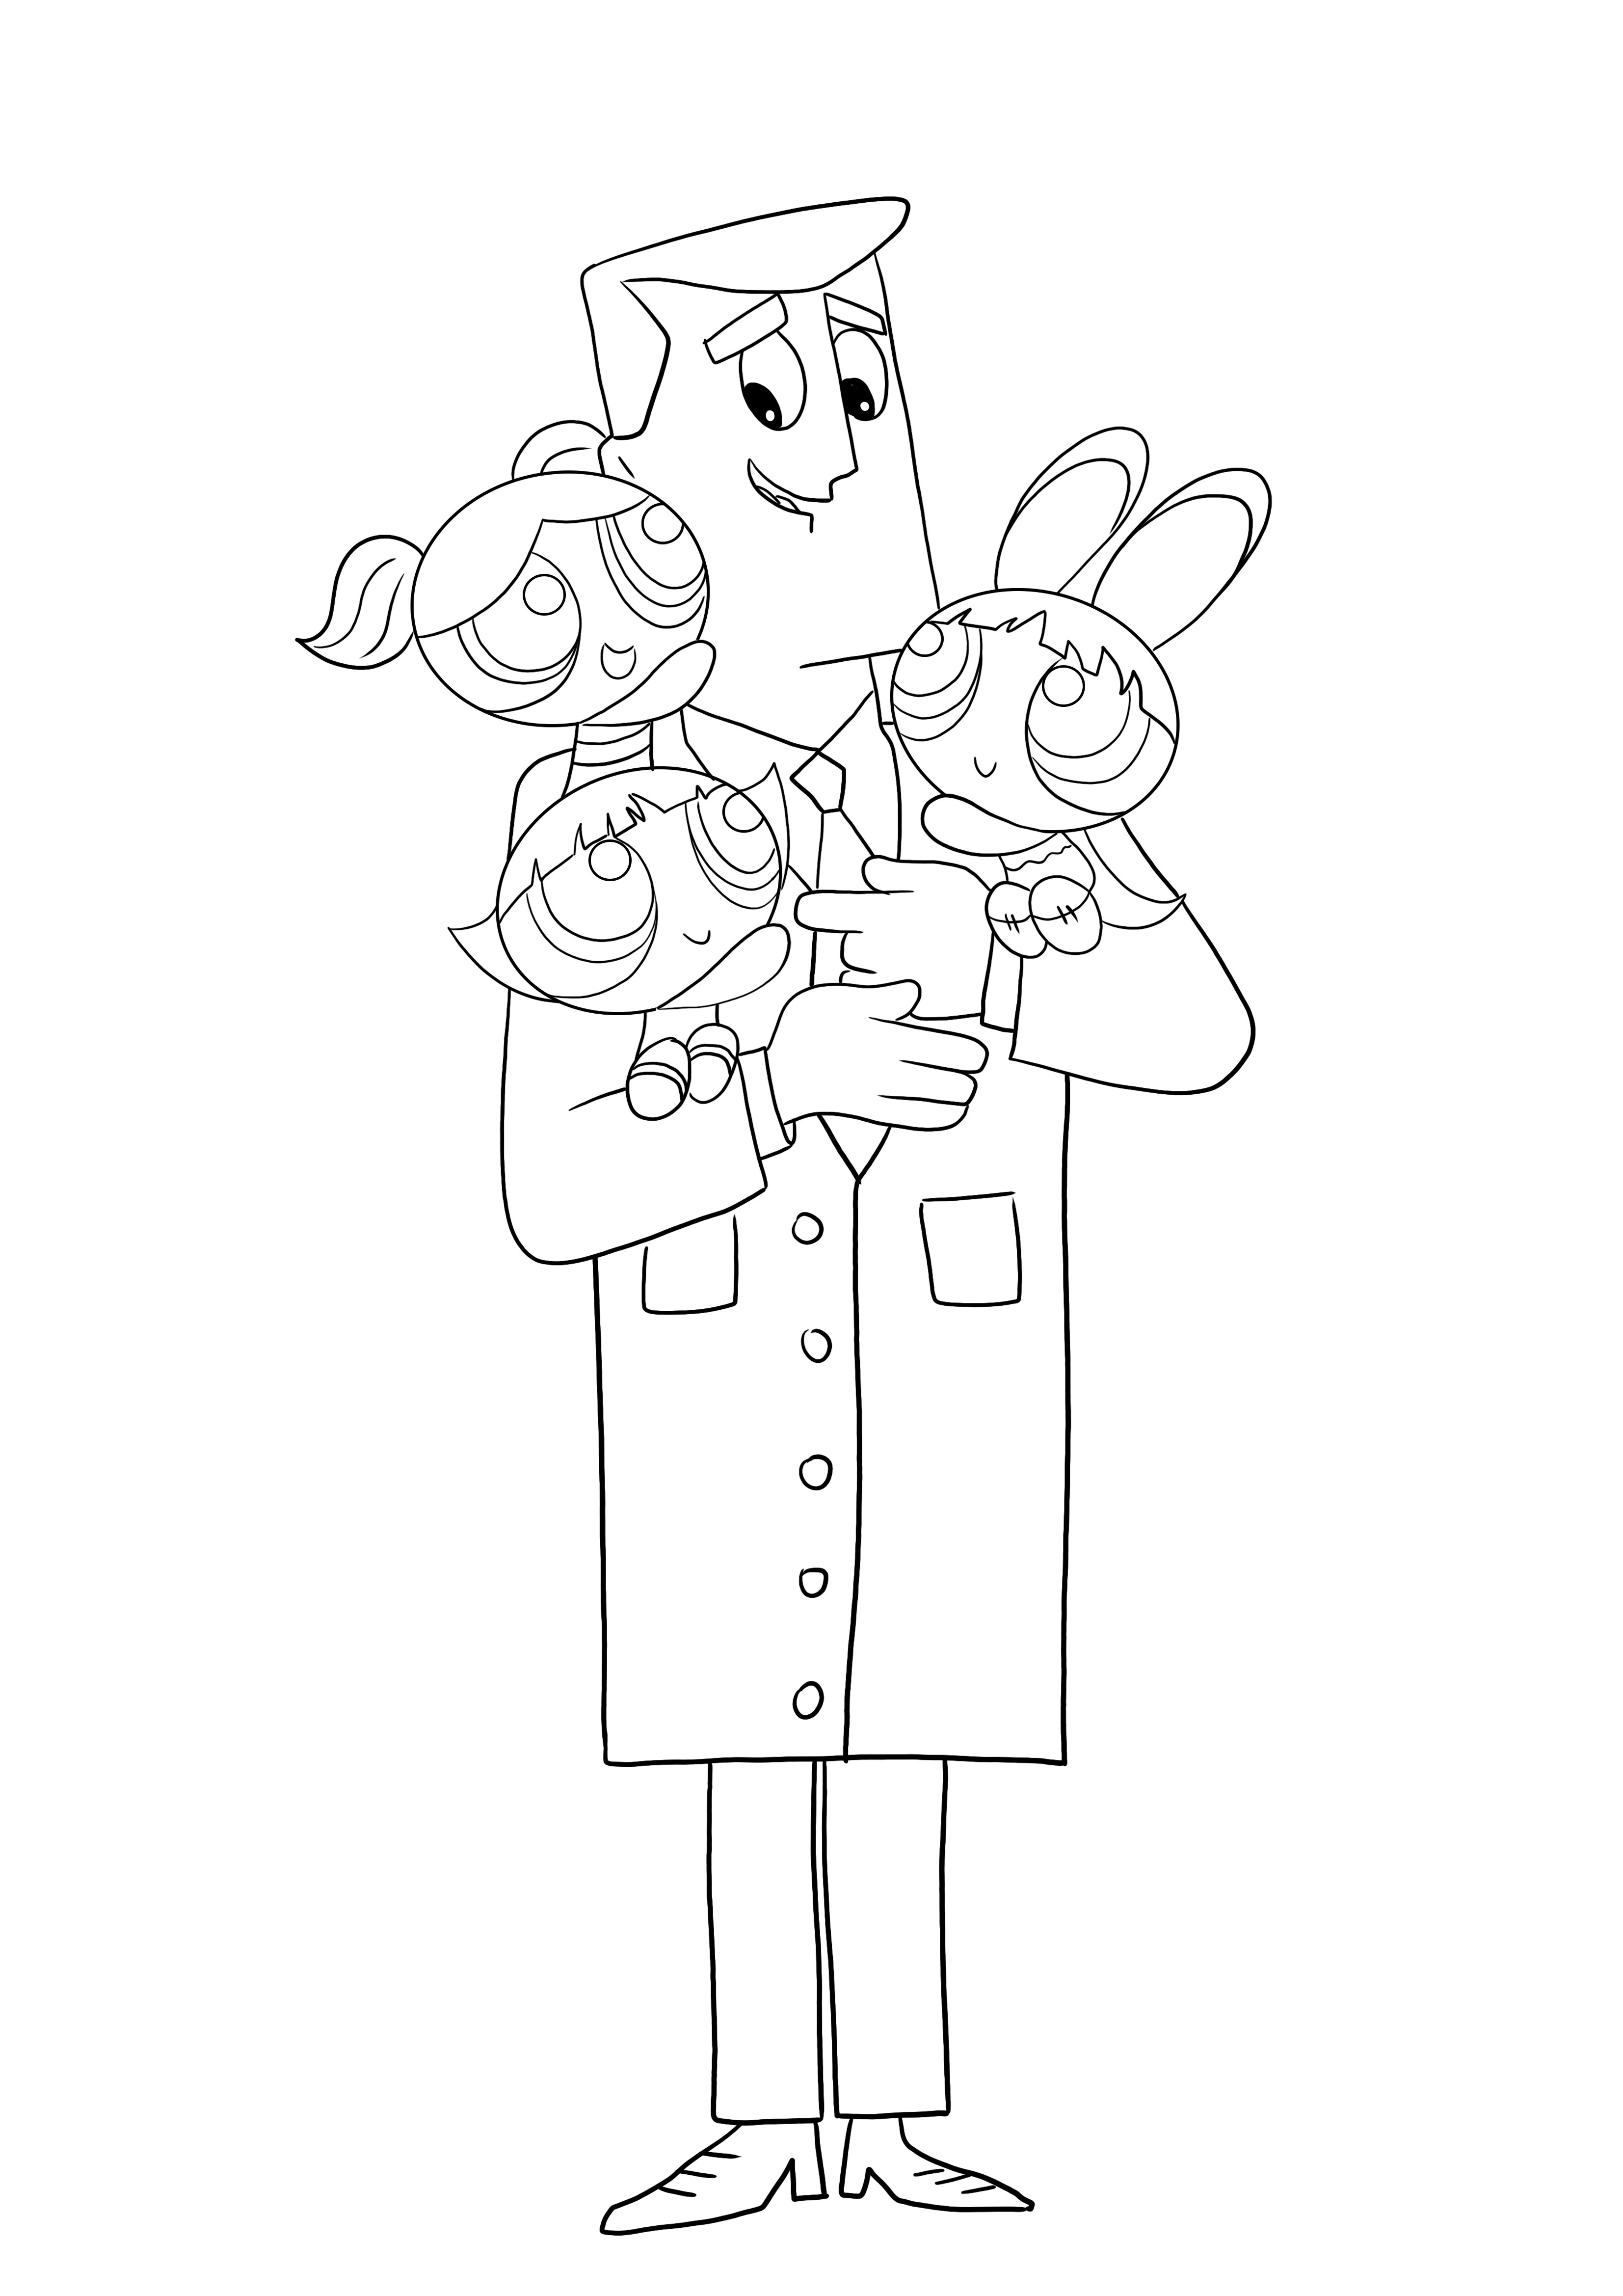 Professor Utonium holding Powerpuff Girls in his hands-ree to print and color